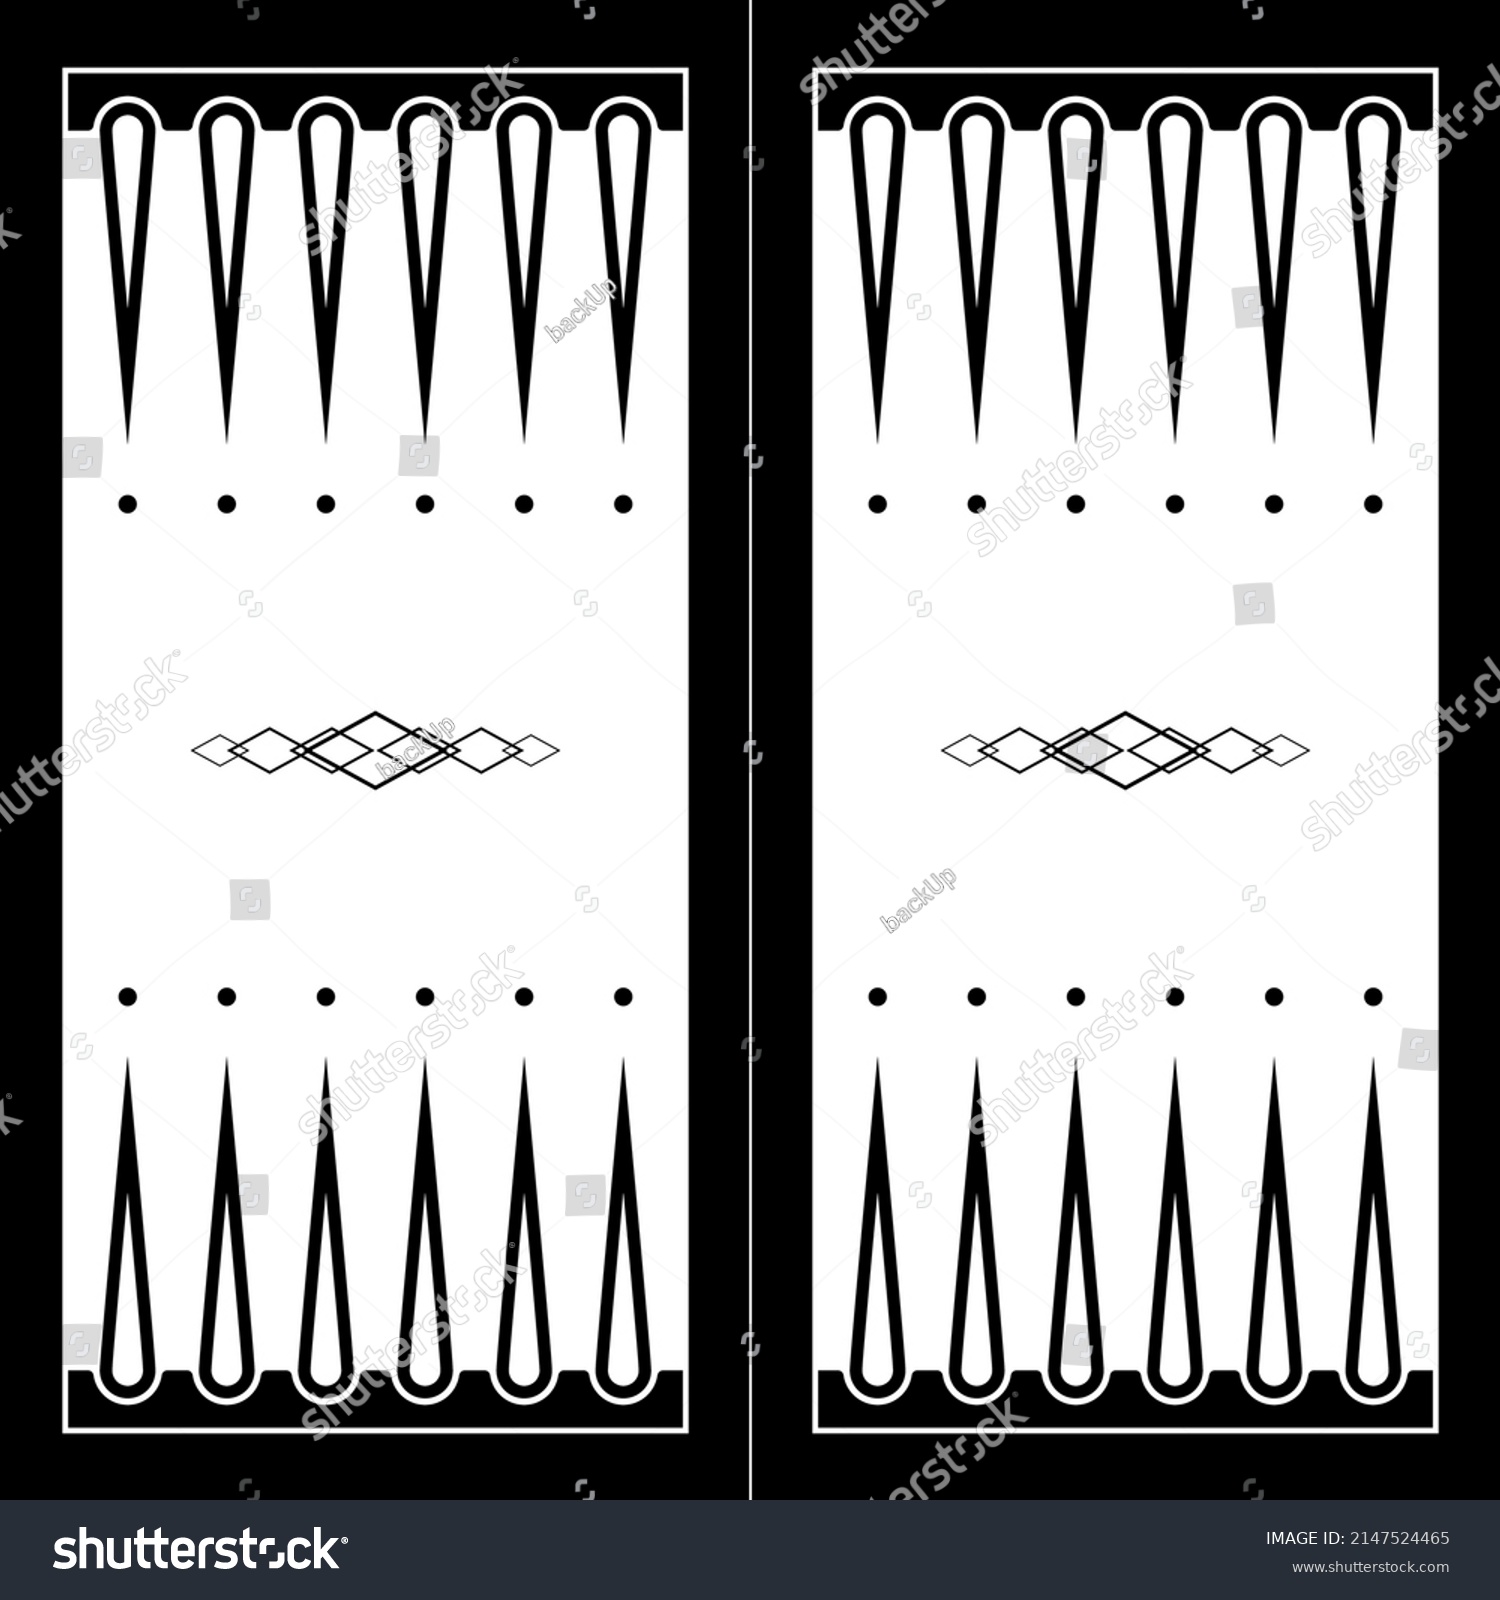 SVG of Backgammon board for playing with chips and dice vector illustration. Abstract black traditional texture for table or wooden box, vintage colored gaming club object background. Entertainment concept svg